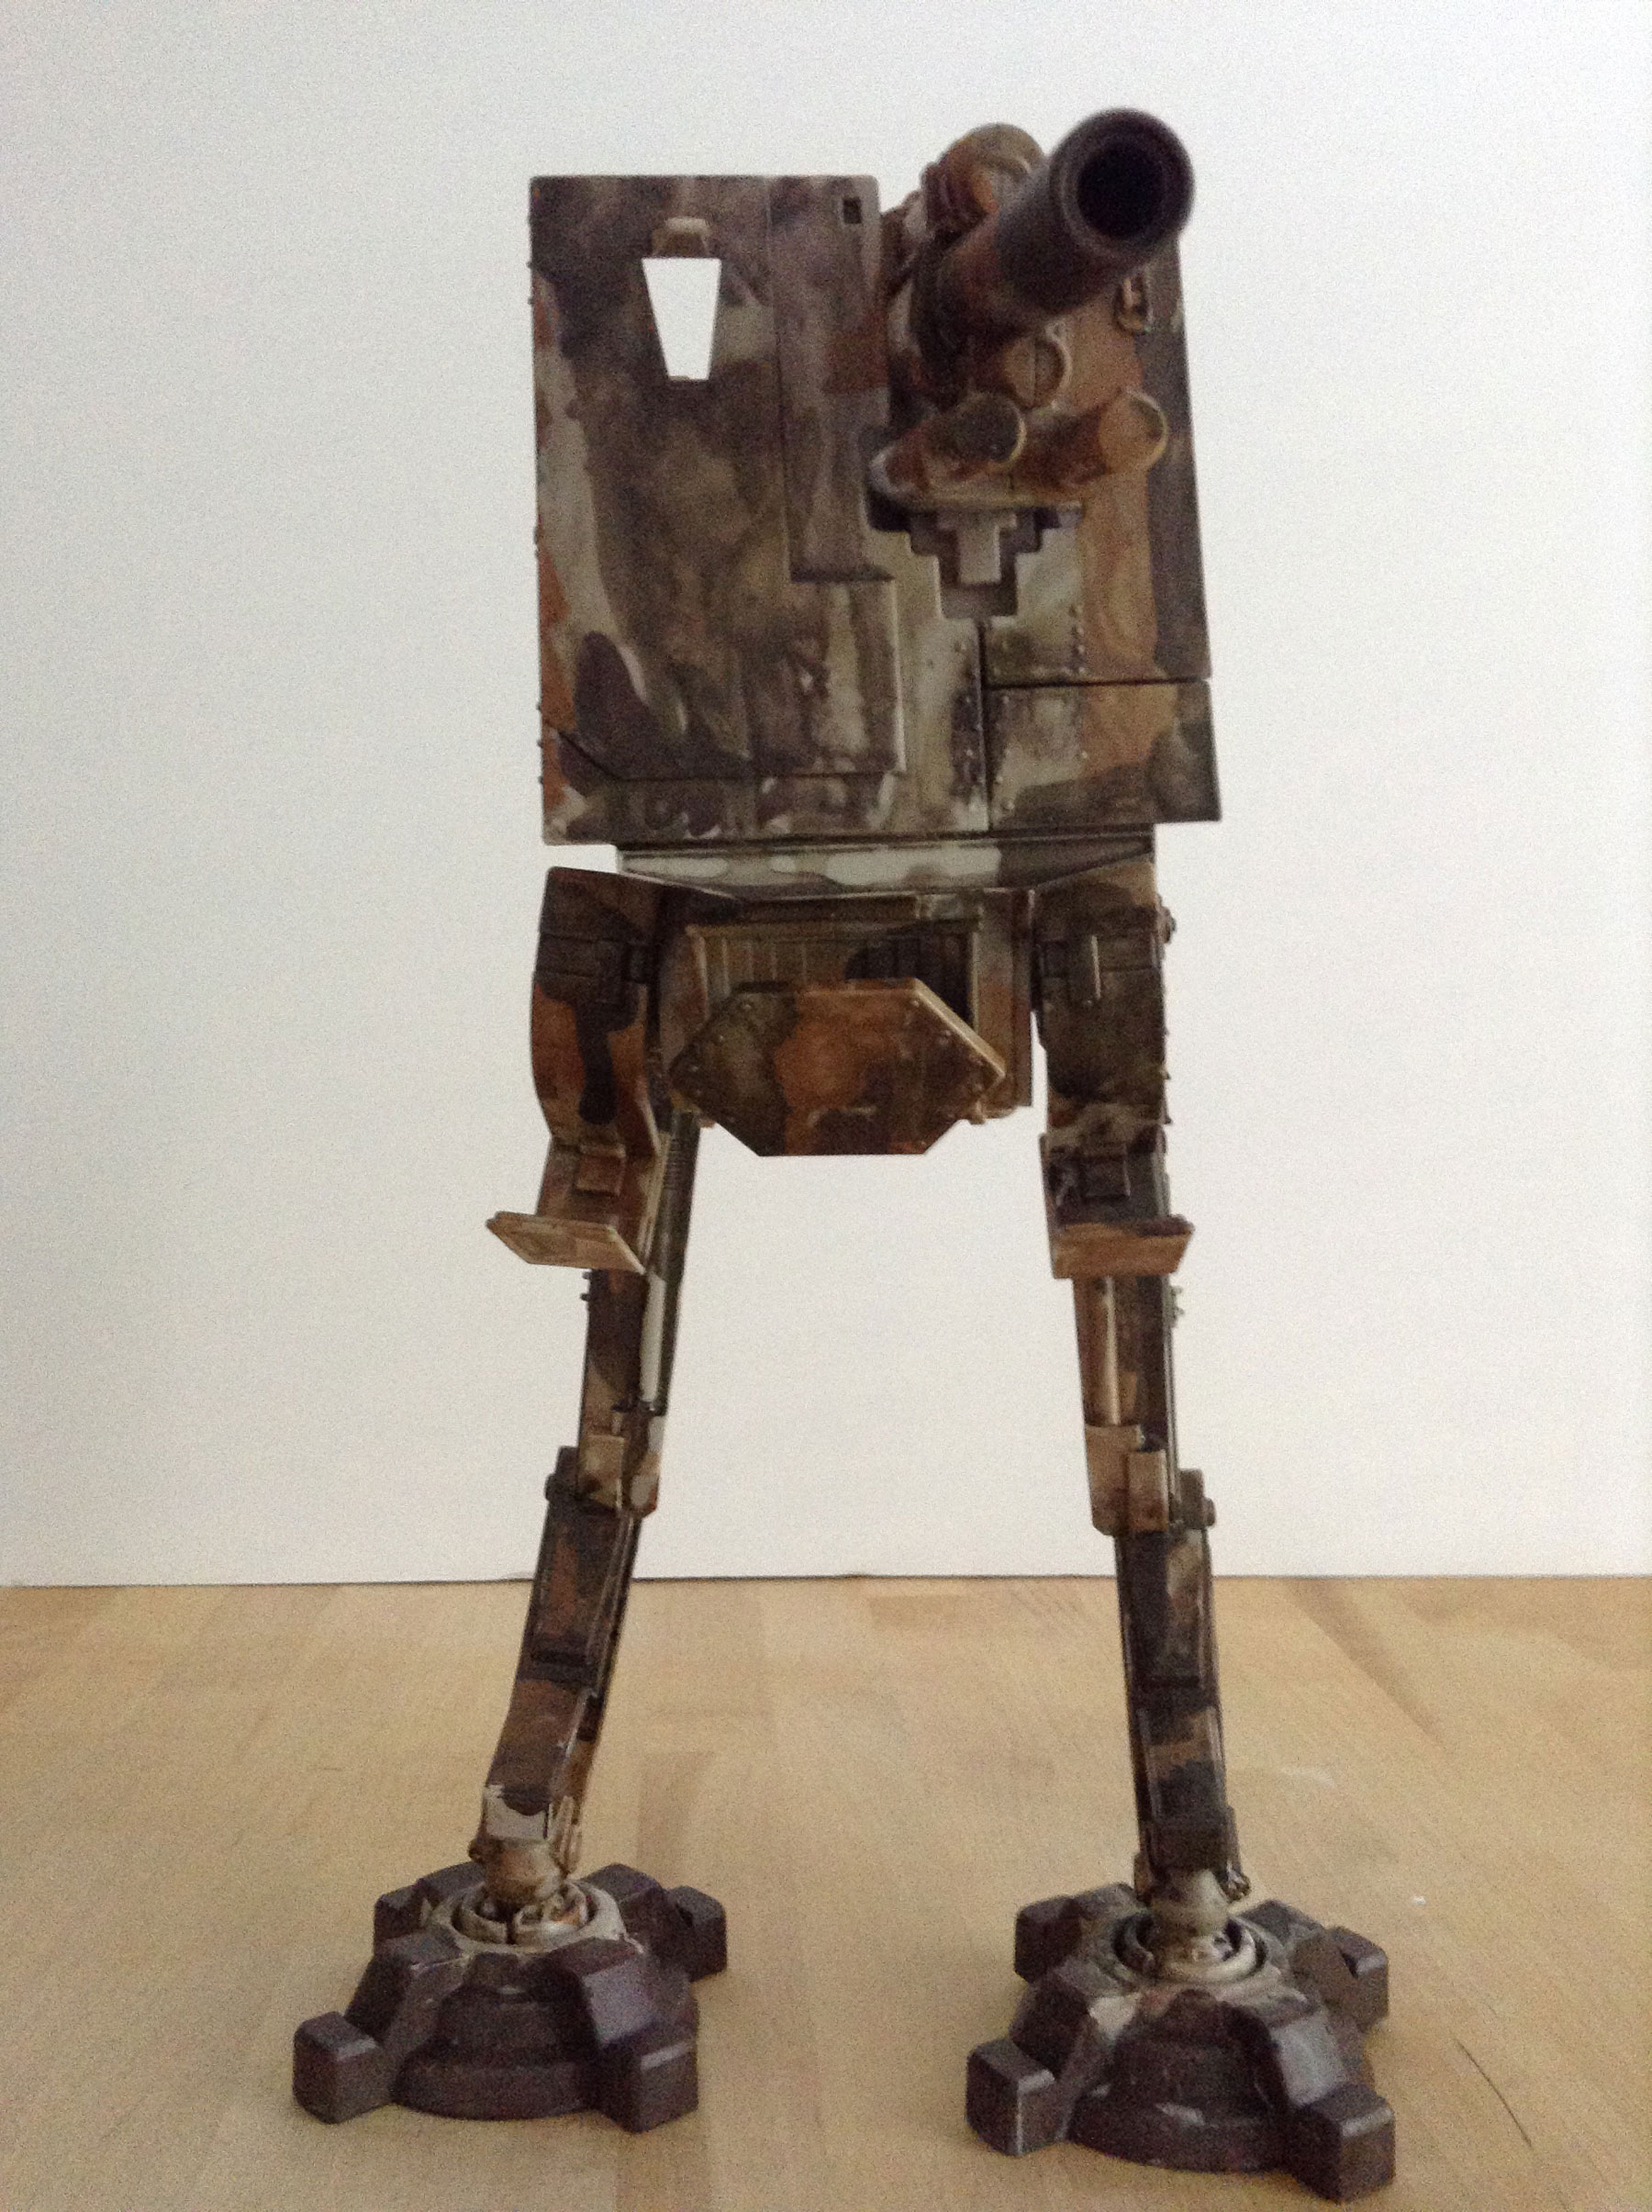 The Star Wars AT-DT Customized! - Jedi Archives